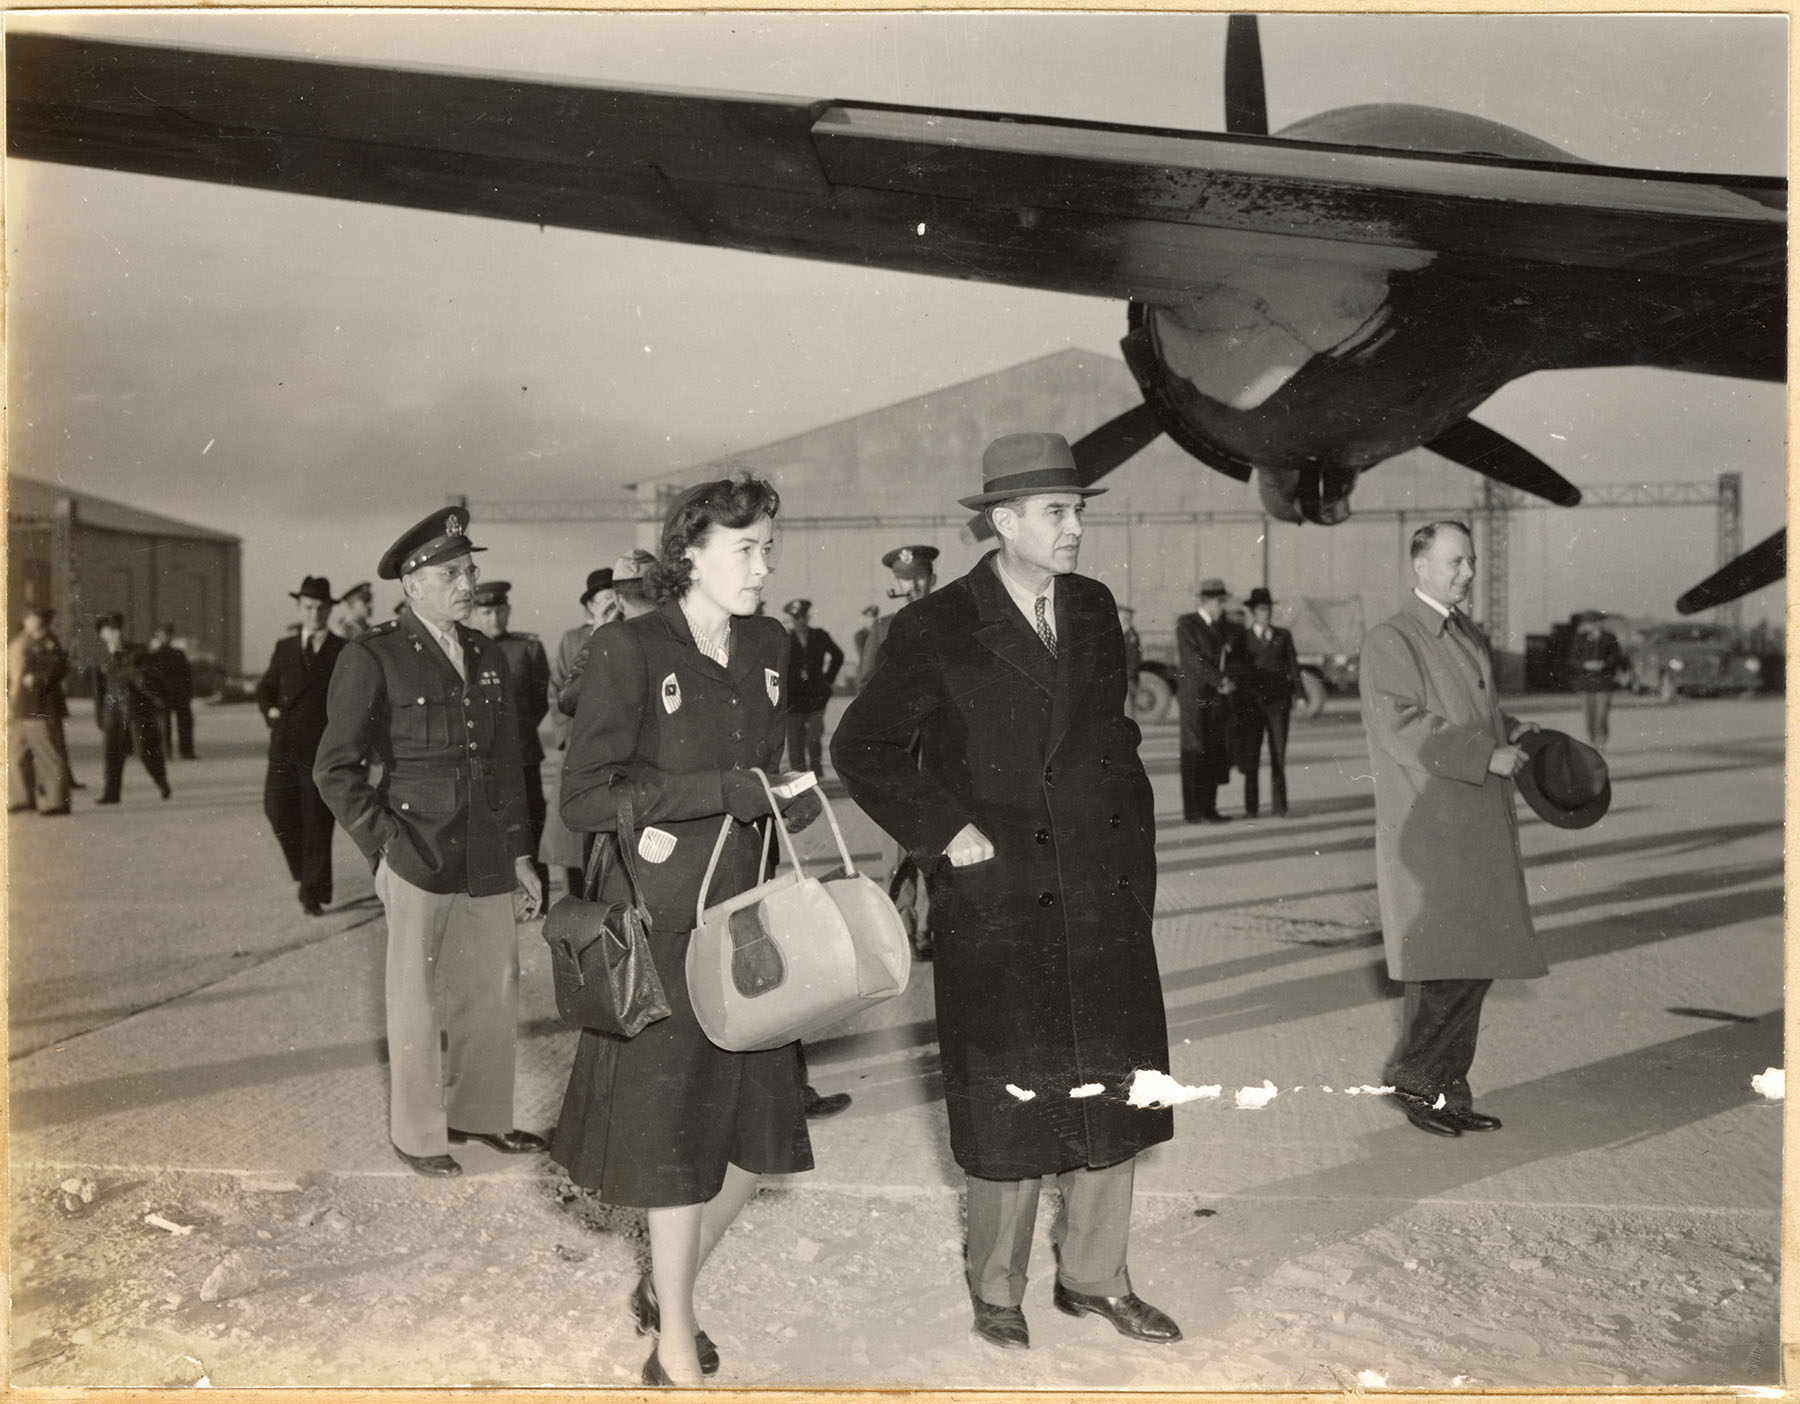 A civilian woman and man depart an airplane with army officers in backgroiund